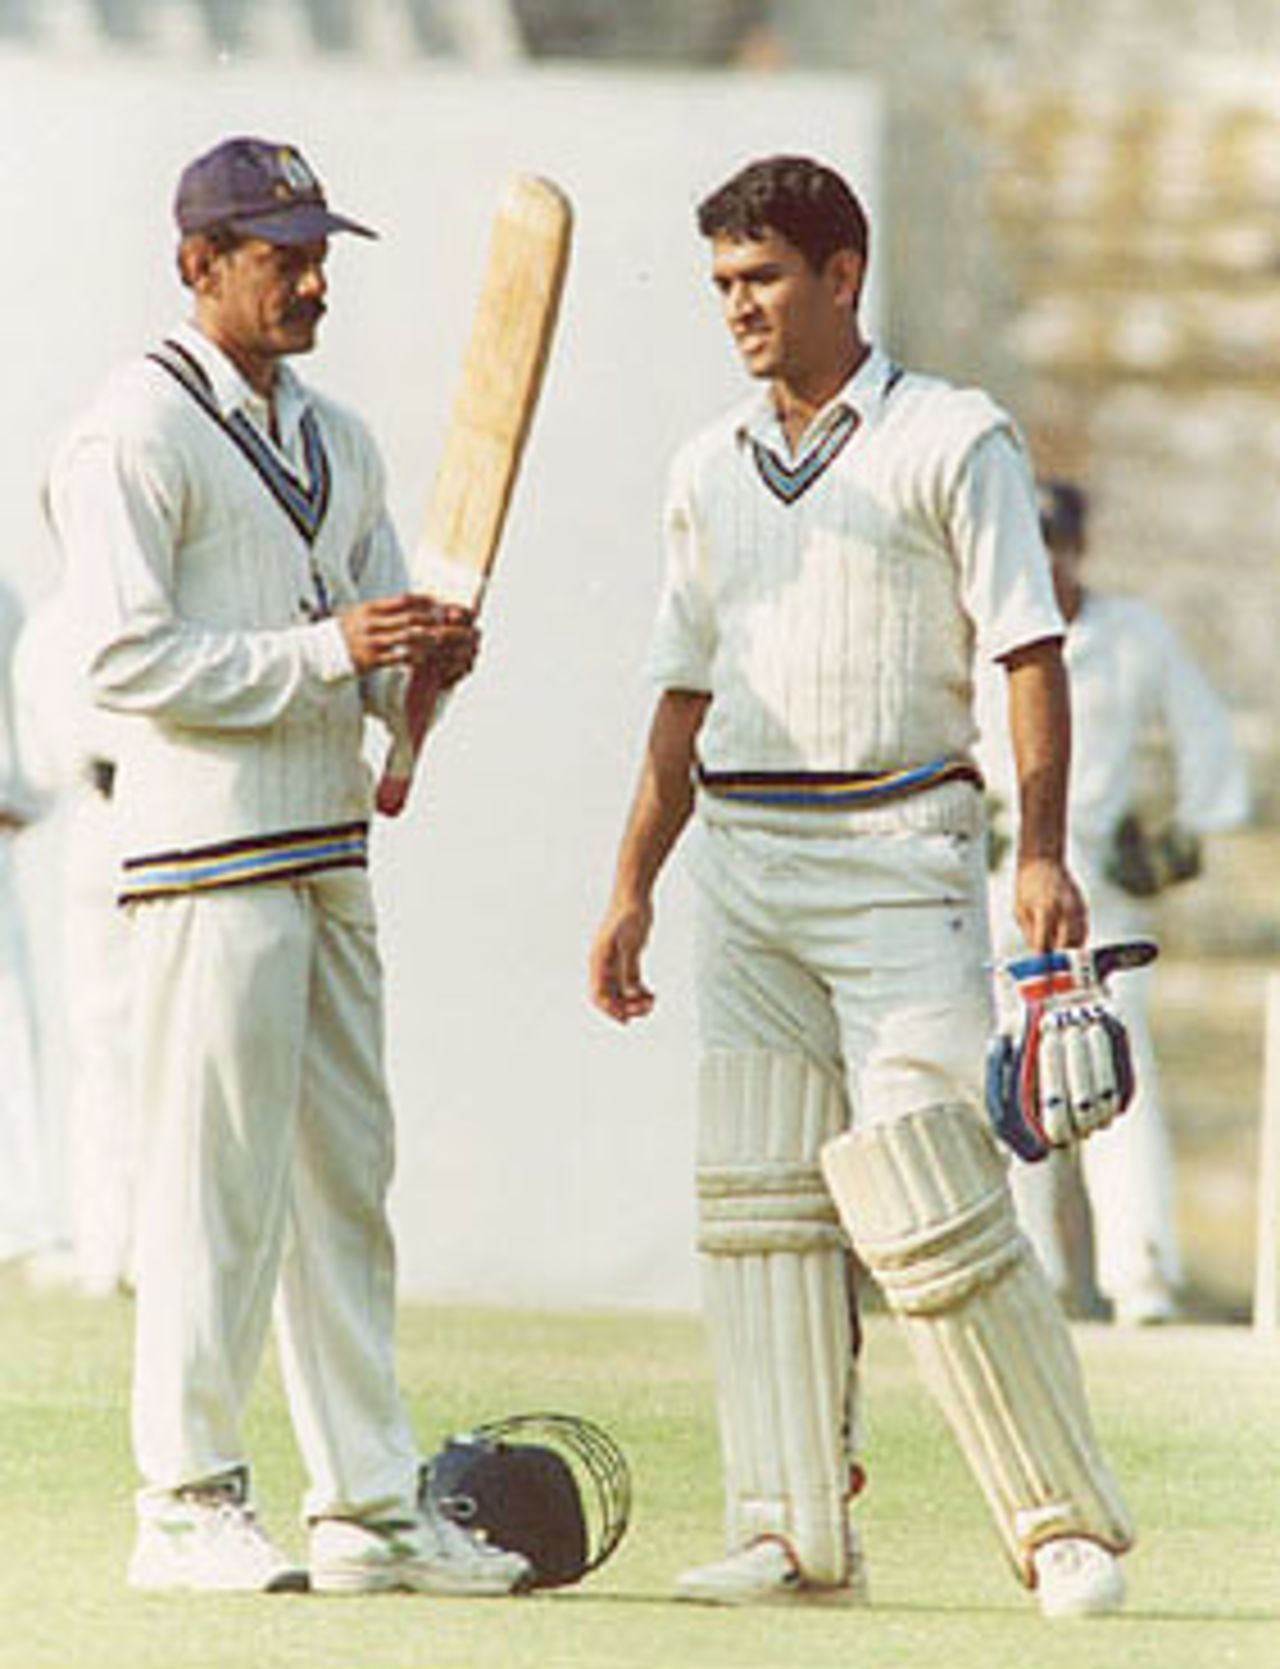 Utpal Chatterjee taking a look at MS Dhoni's bat in between the overs, Ranji Trophy East Zone League, 2000/01, Bengal v Bihar, Eden Gardens, Calcutta, 03-06 January 2001.